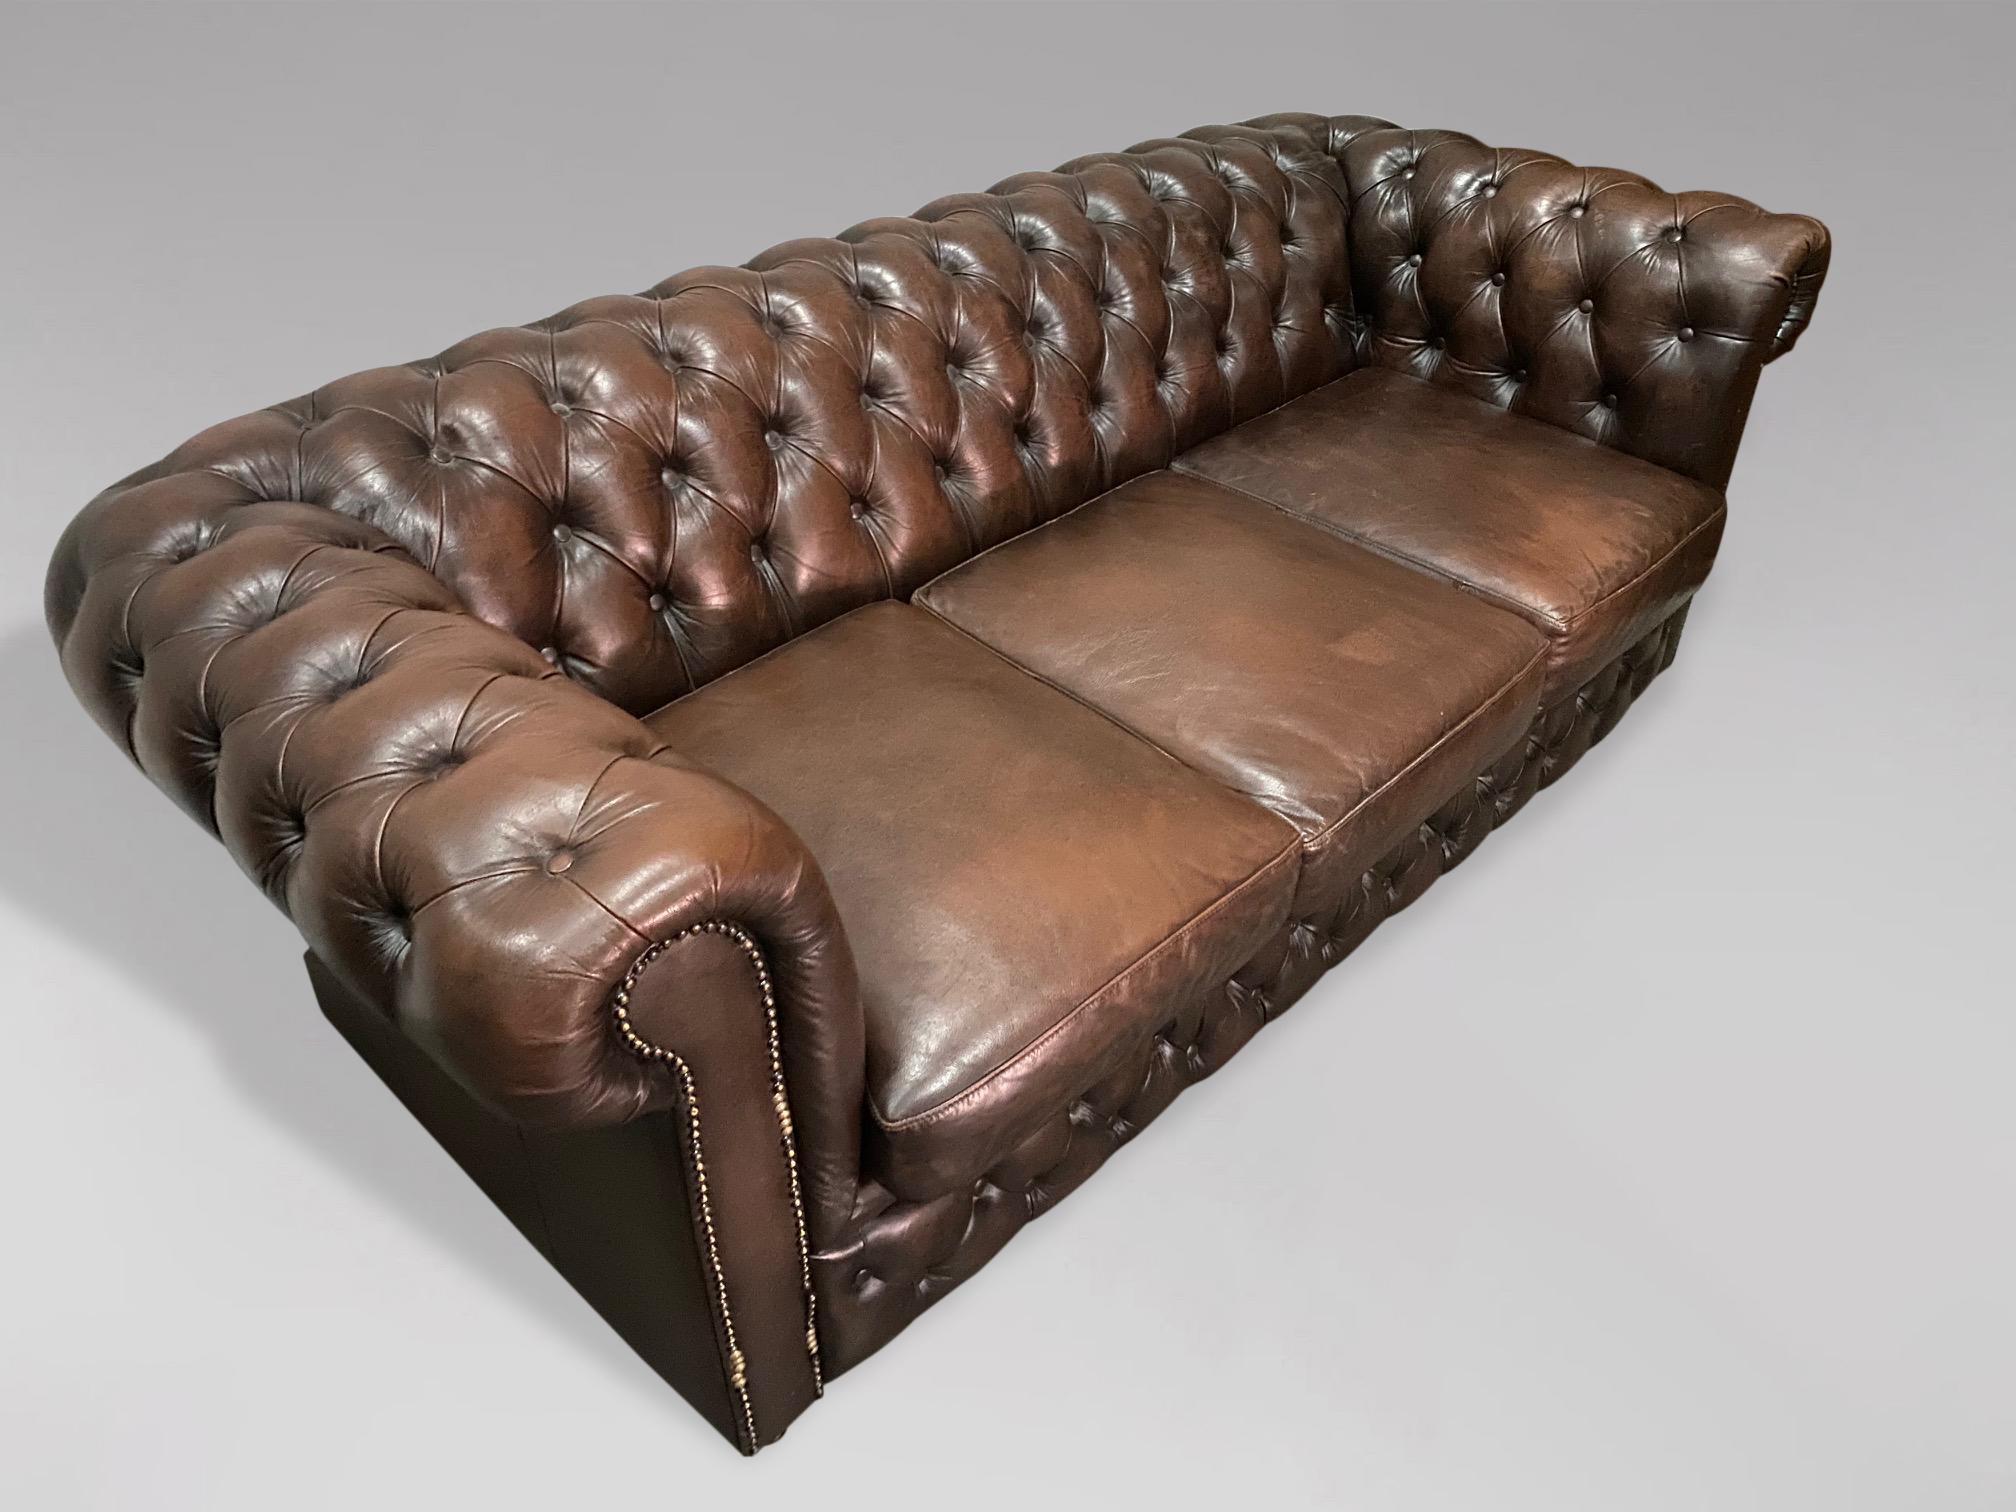 Hand-Crafted 20th Century Vintage Brown Leather Three Seater Chesterfield Sofa